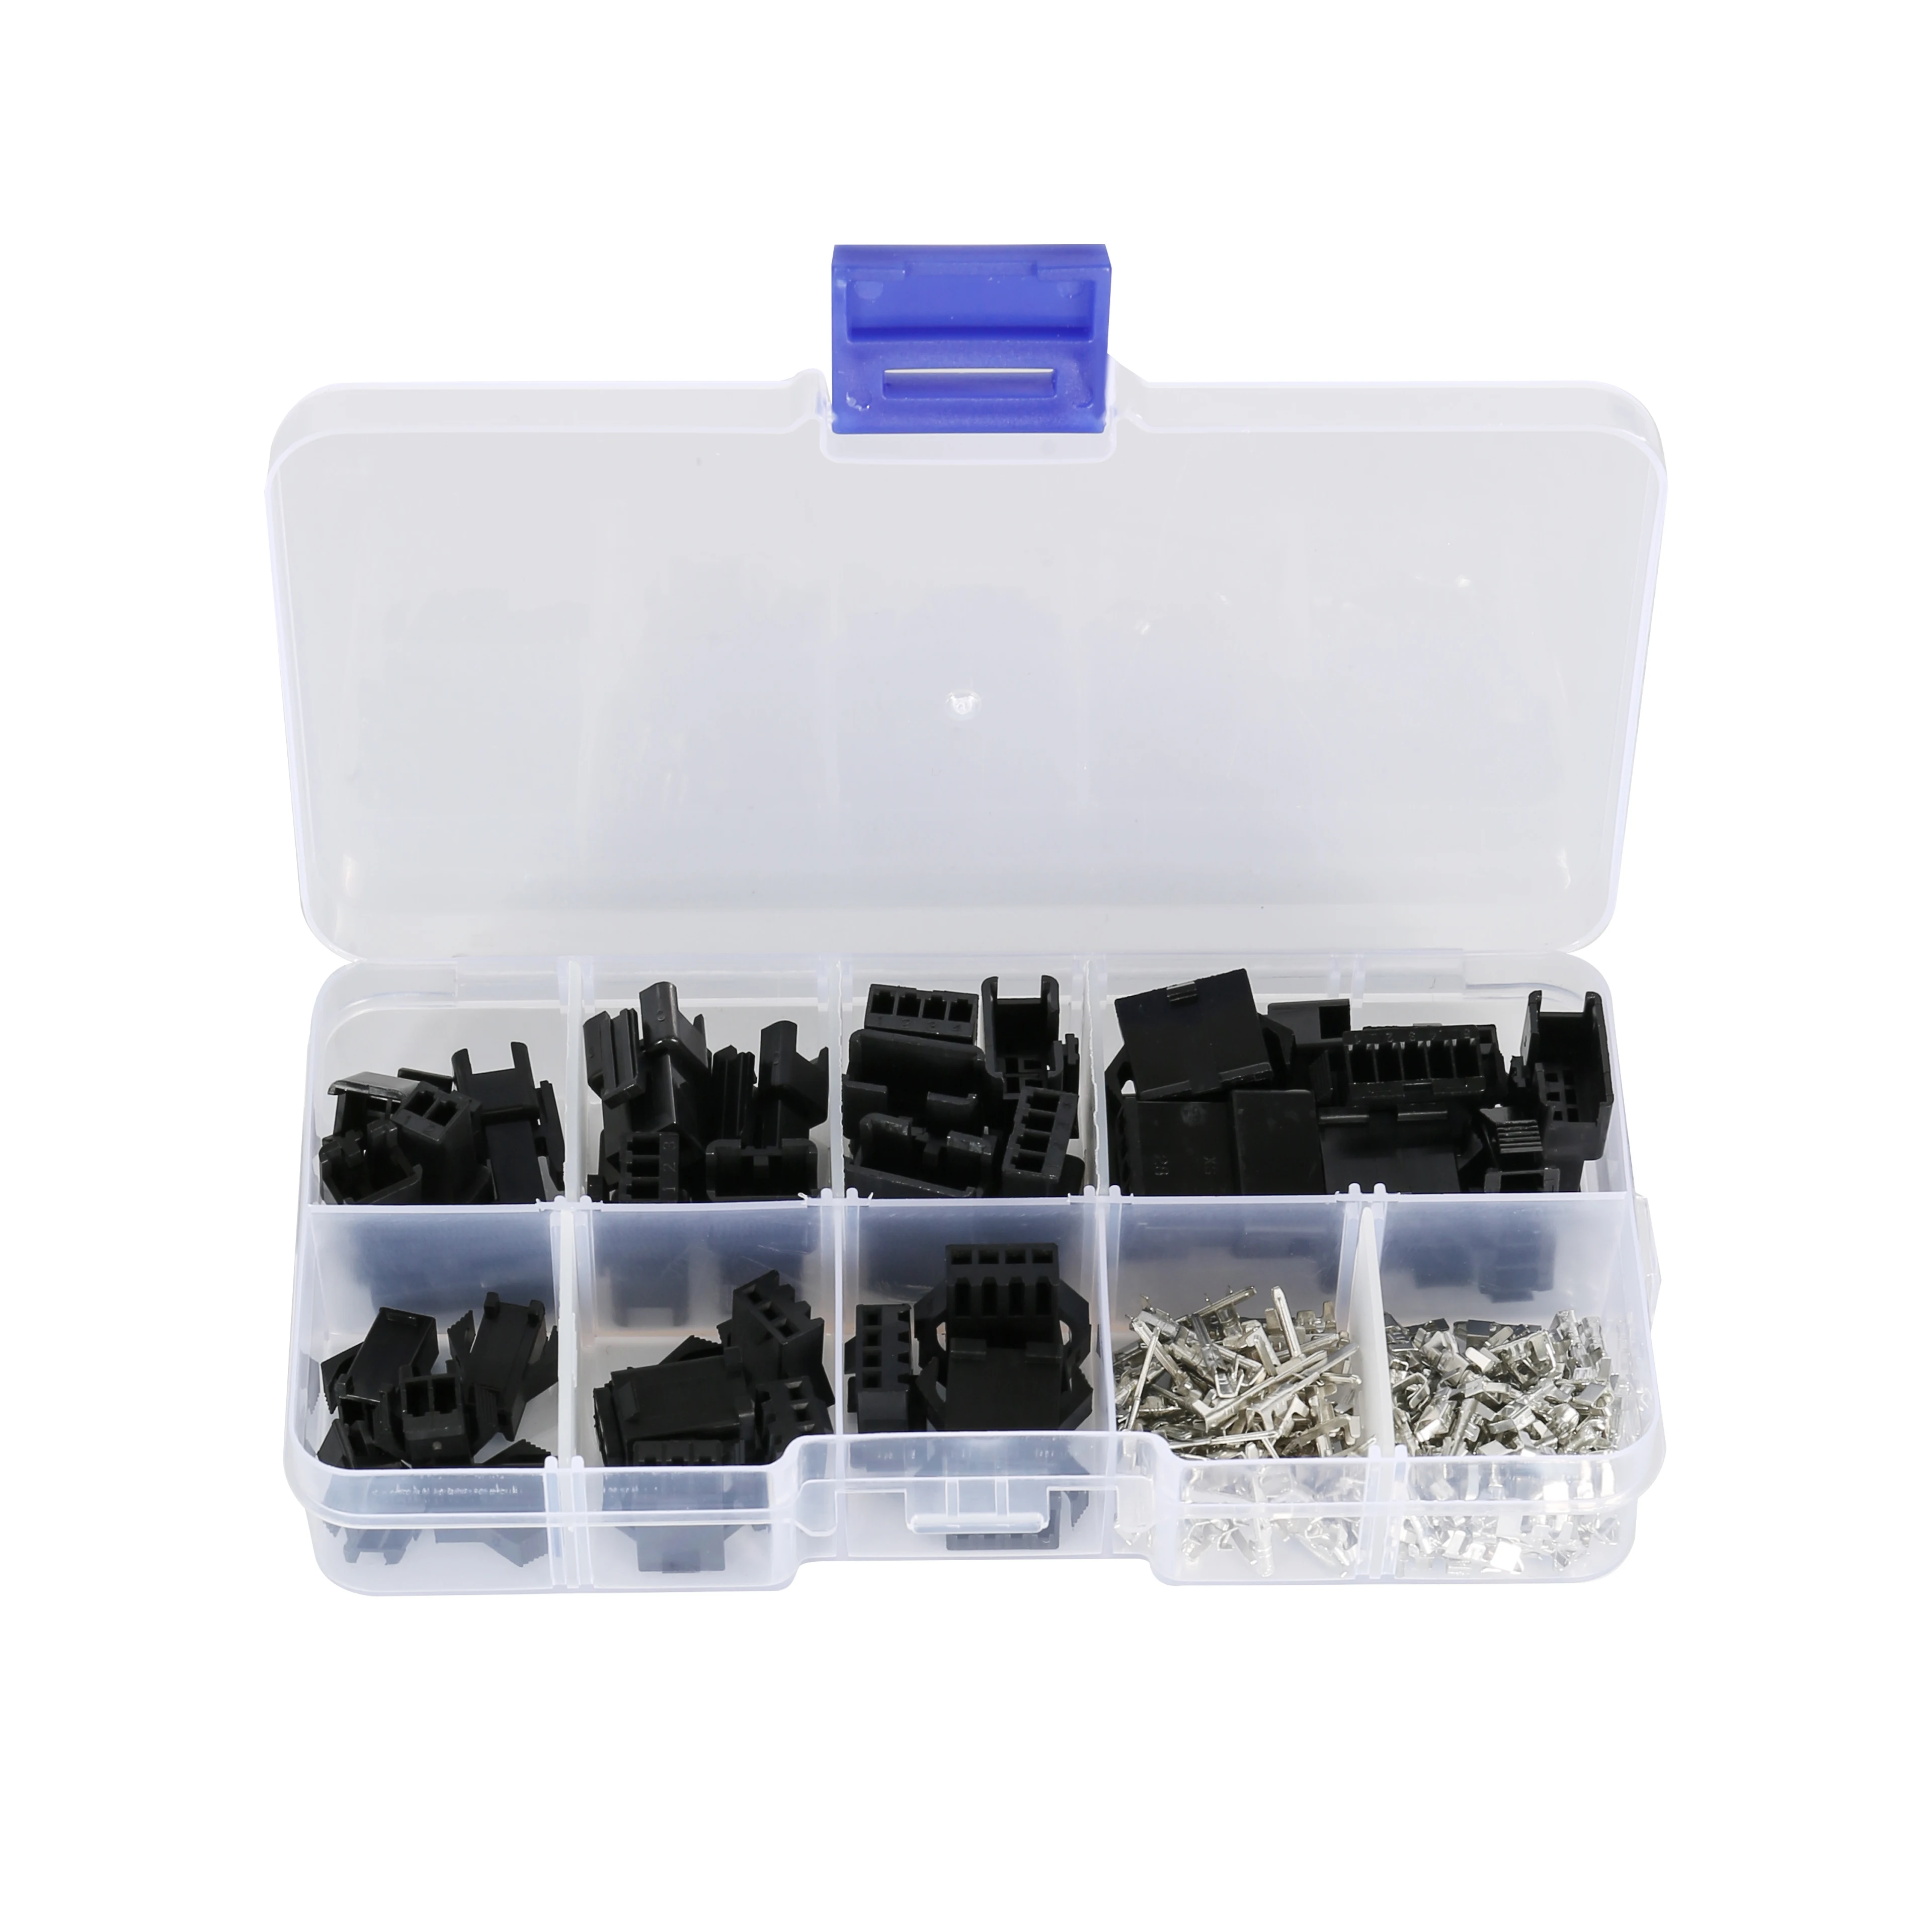 

200Pcs/Box 2.54mm Pitch JST SM/Dupont Jumper Wire Connector Kit 2/3/4/5Pin Male/Female Housing Pin Header Crimp Terminal Adapter